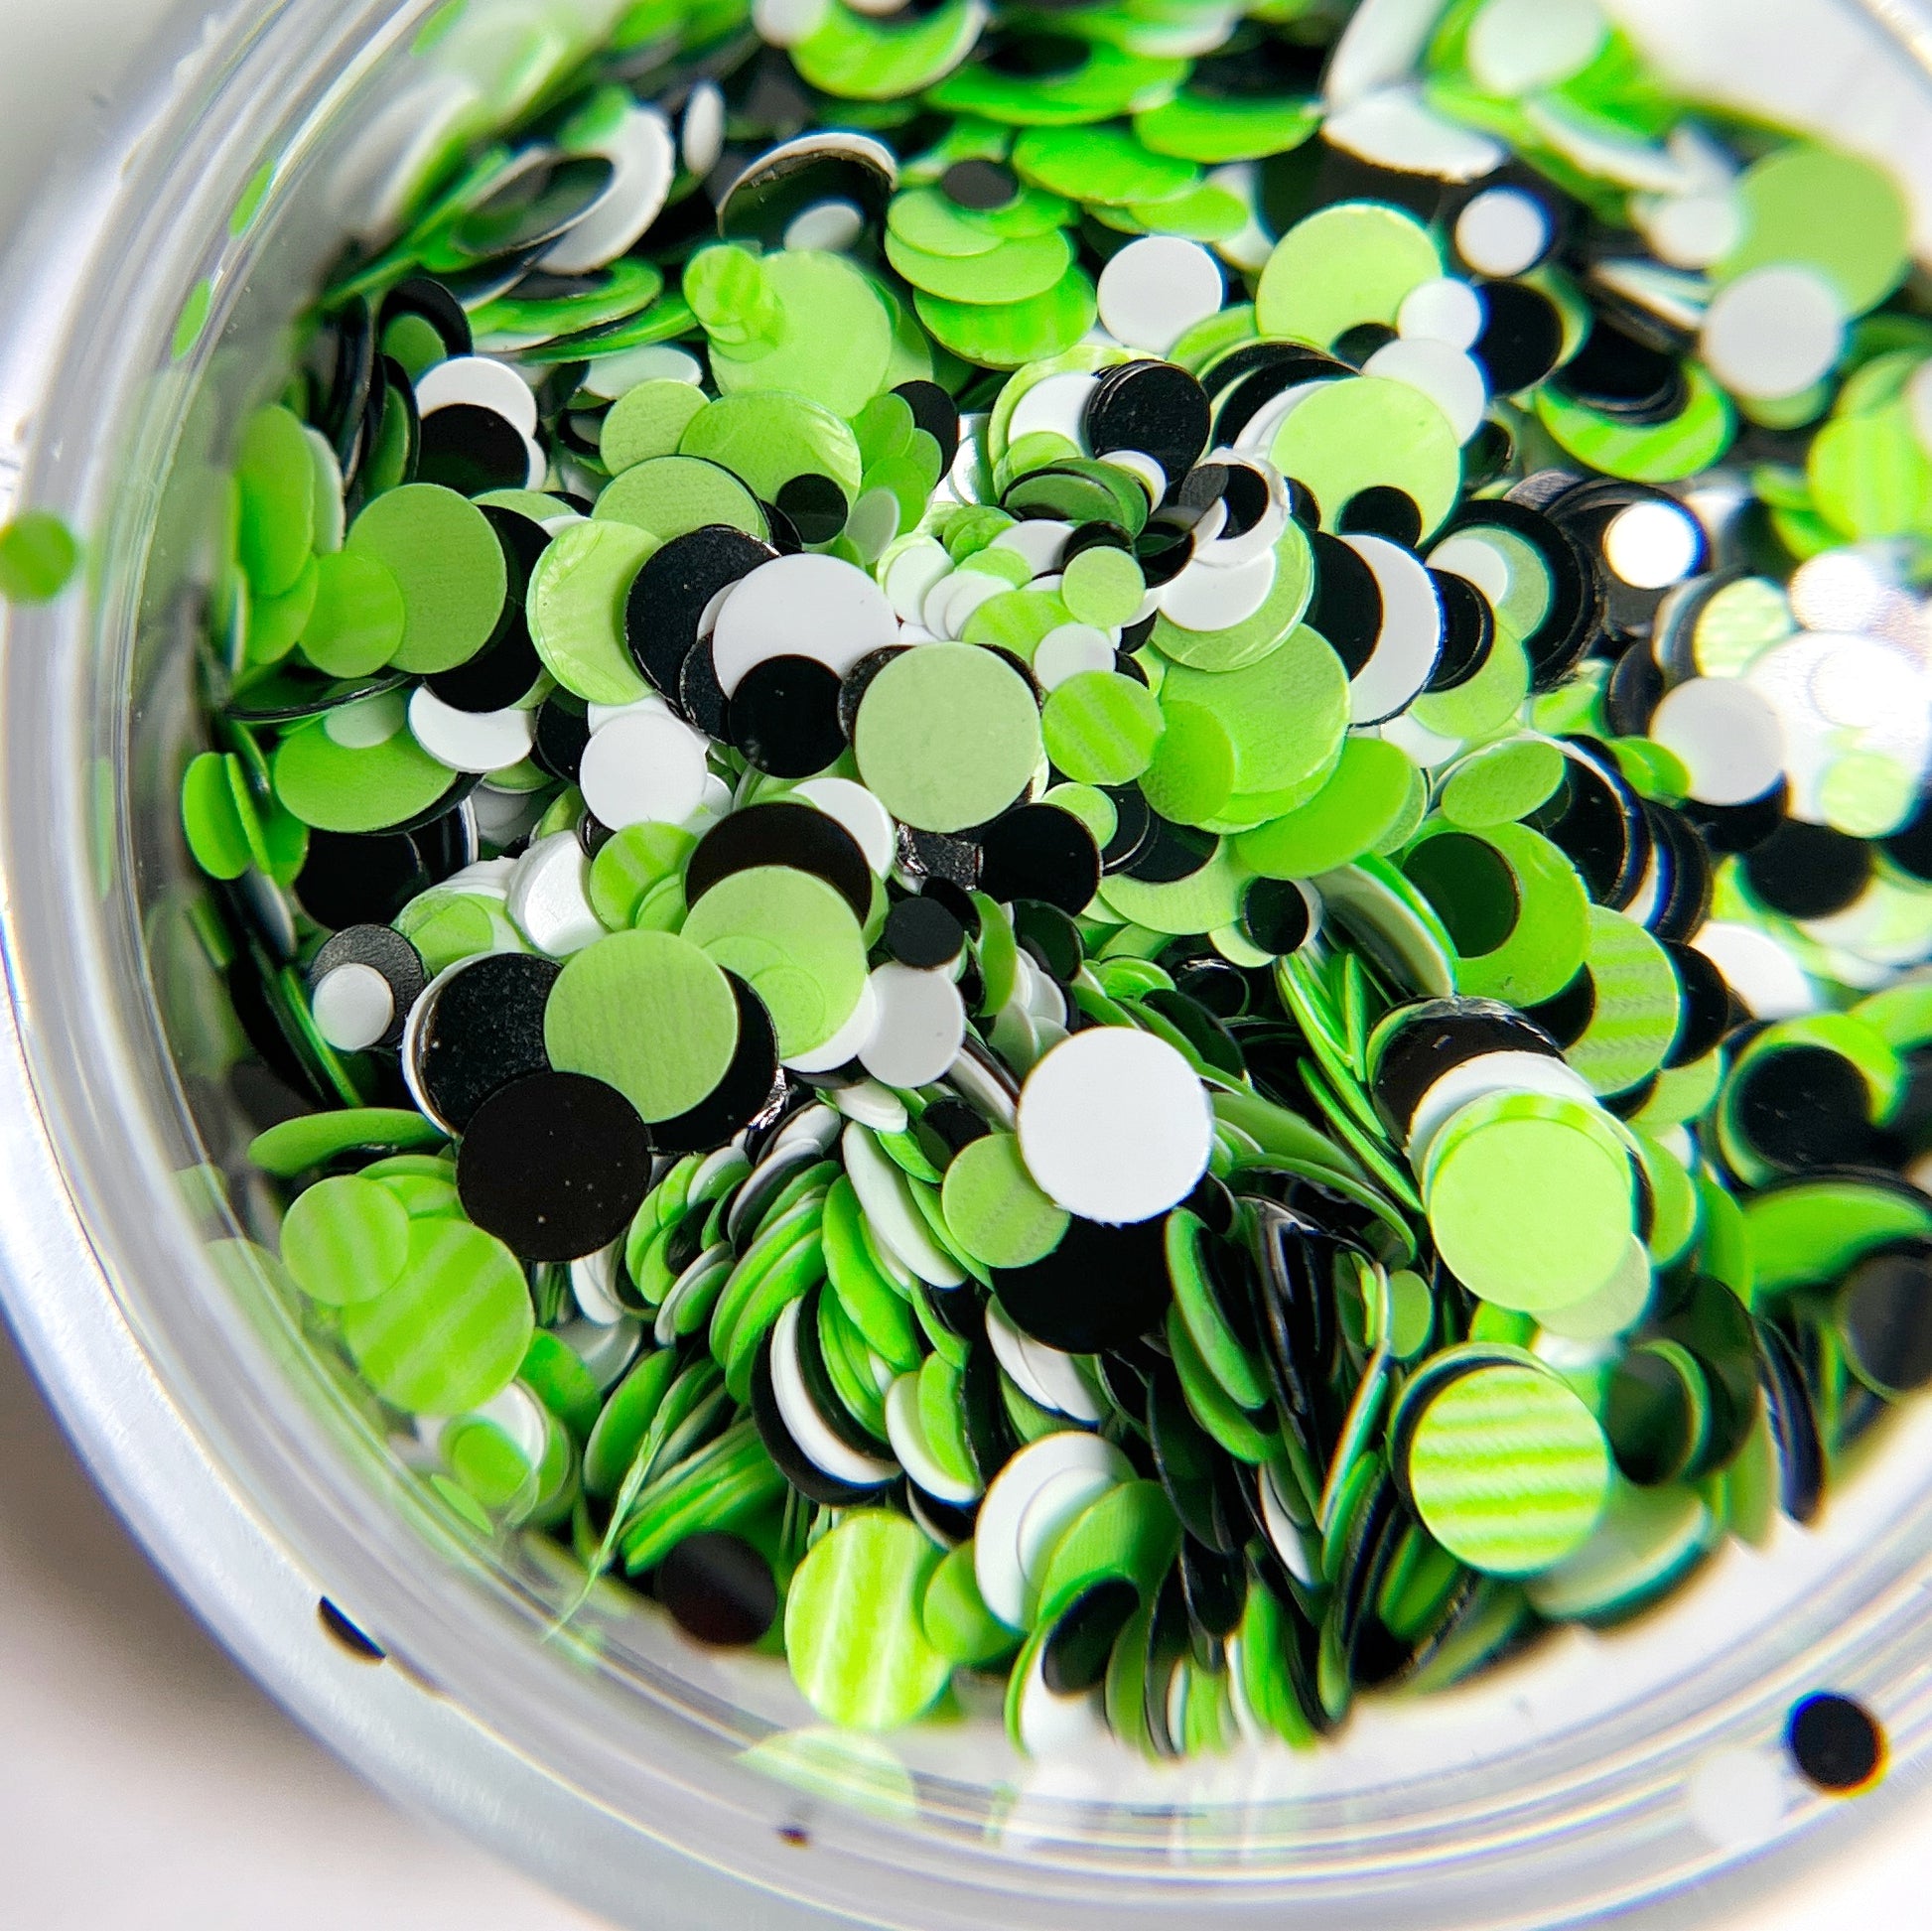 Multi-size green, black and white spots in clear jar on white background. 